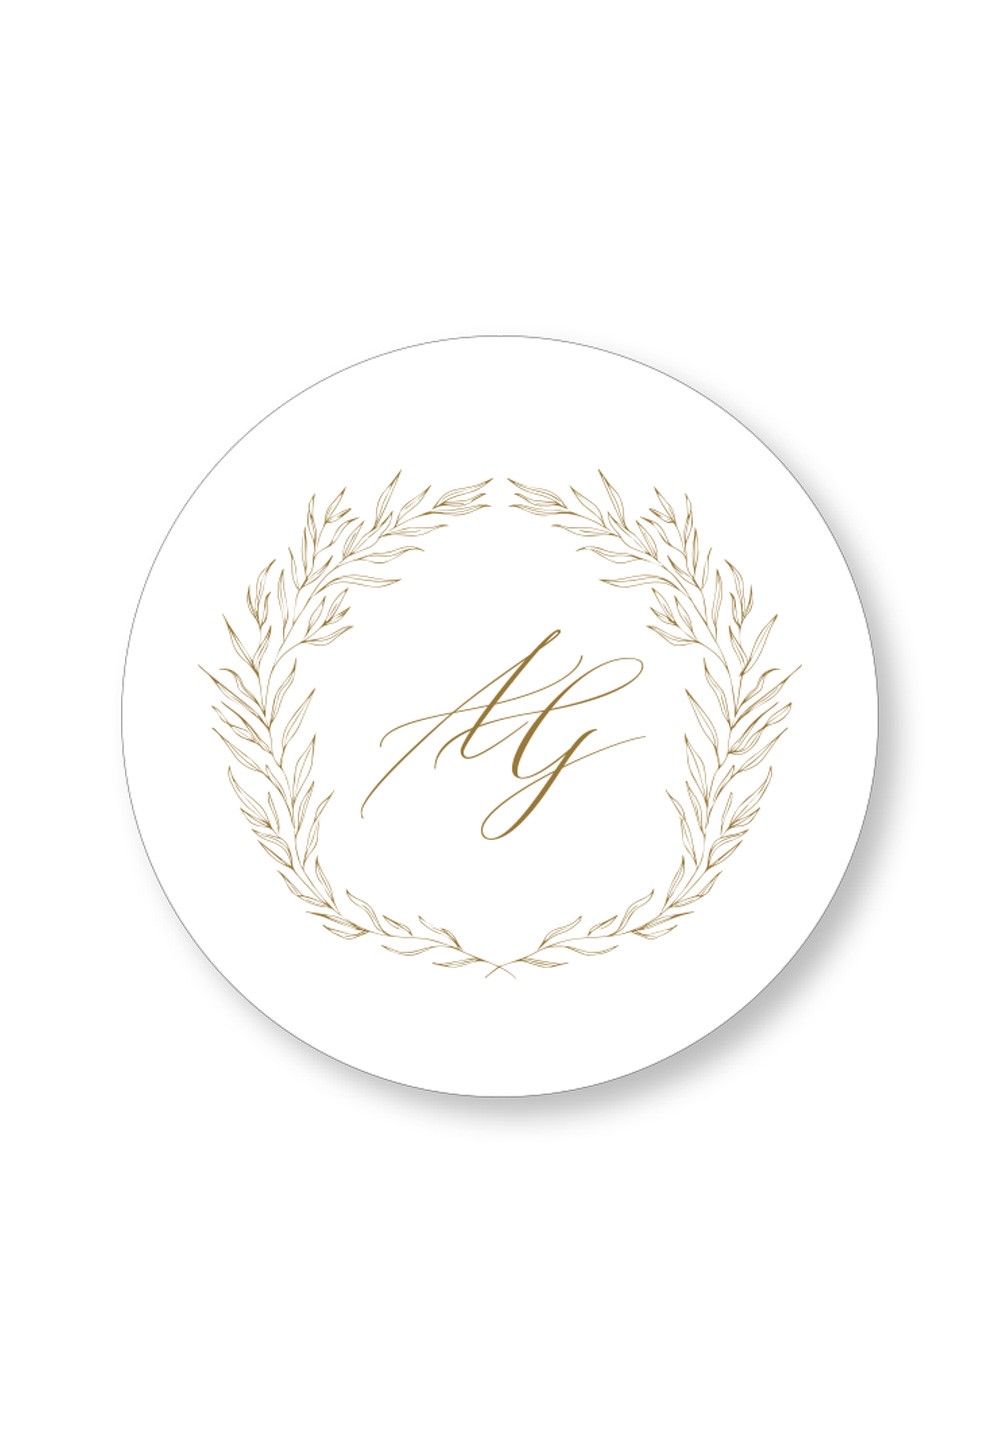 Wildflower Coasters | Paper Daisies Stationery